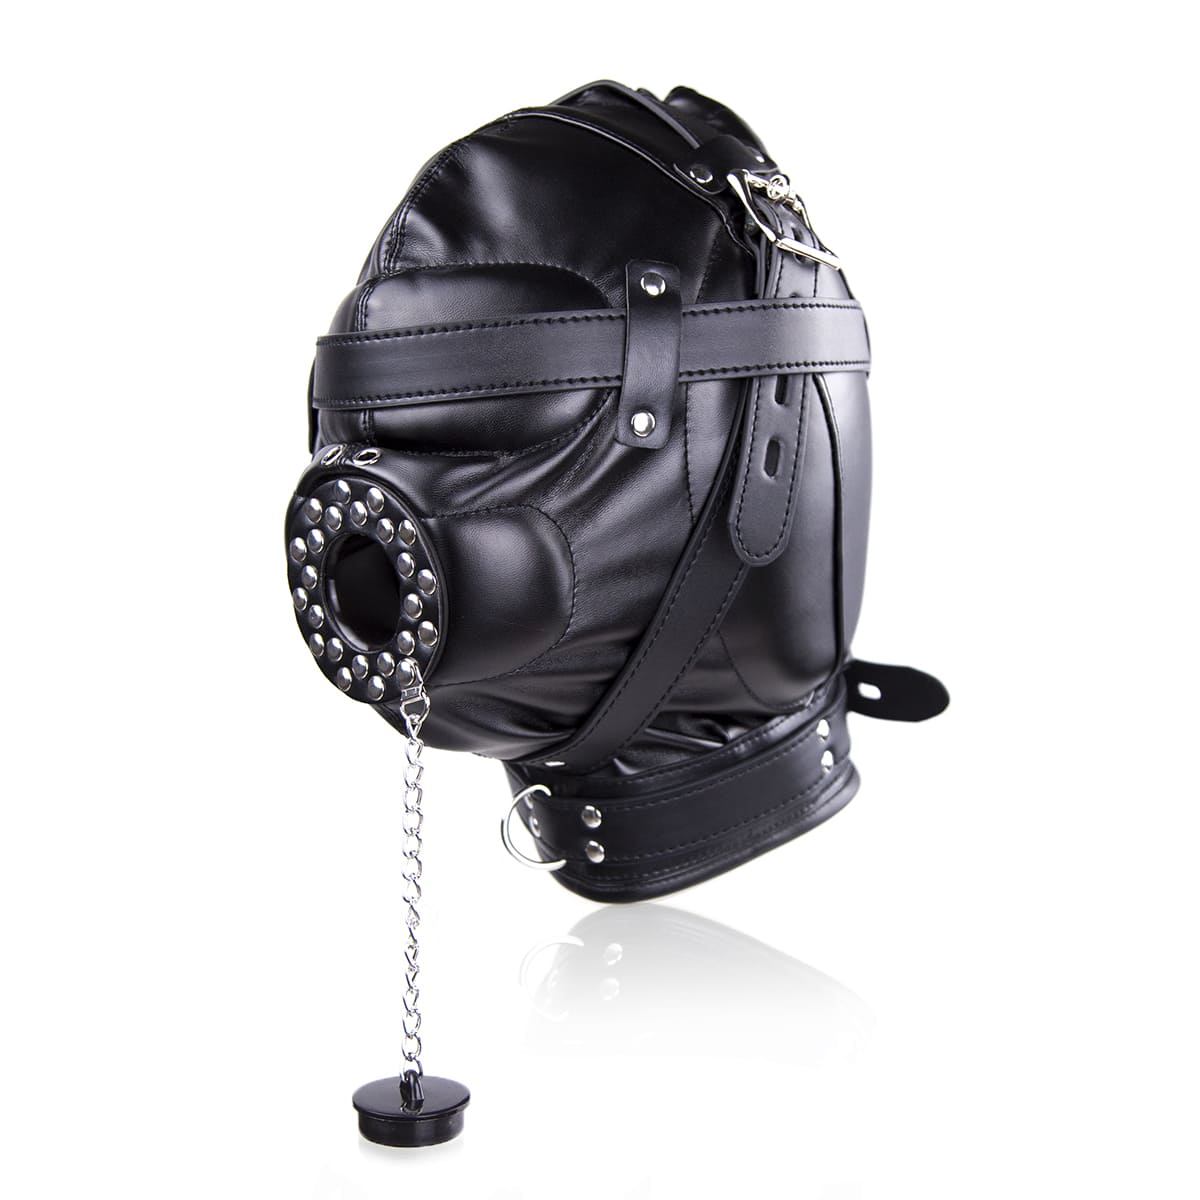 Premium Vegan Leather Bondage Head Hood Mask with Mouth Cover